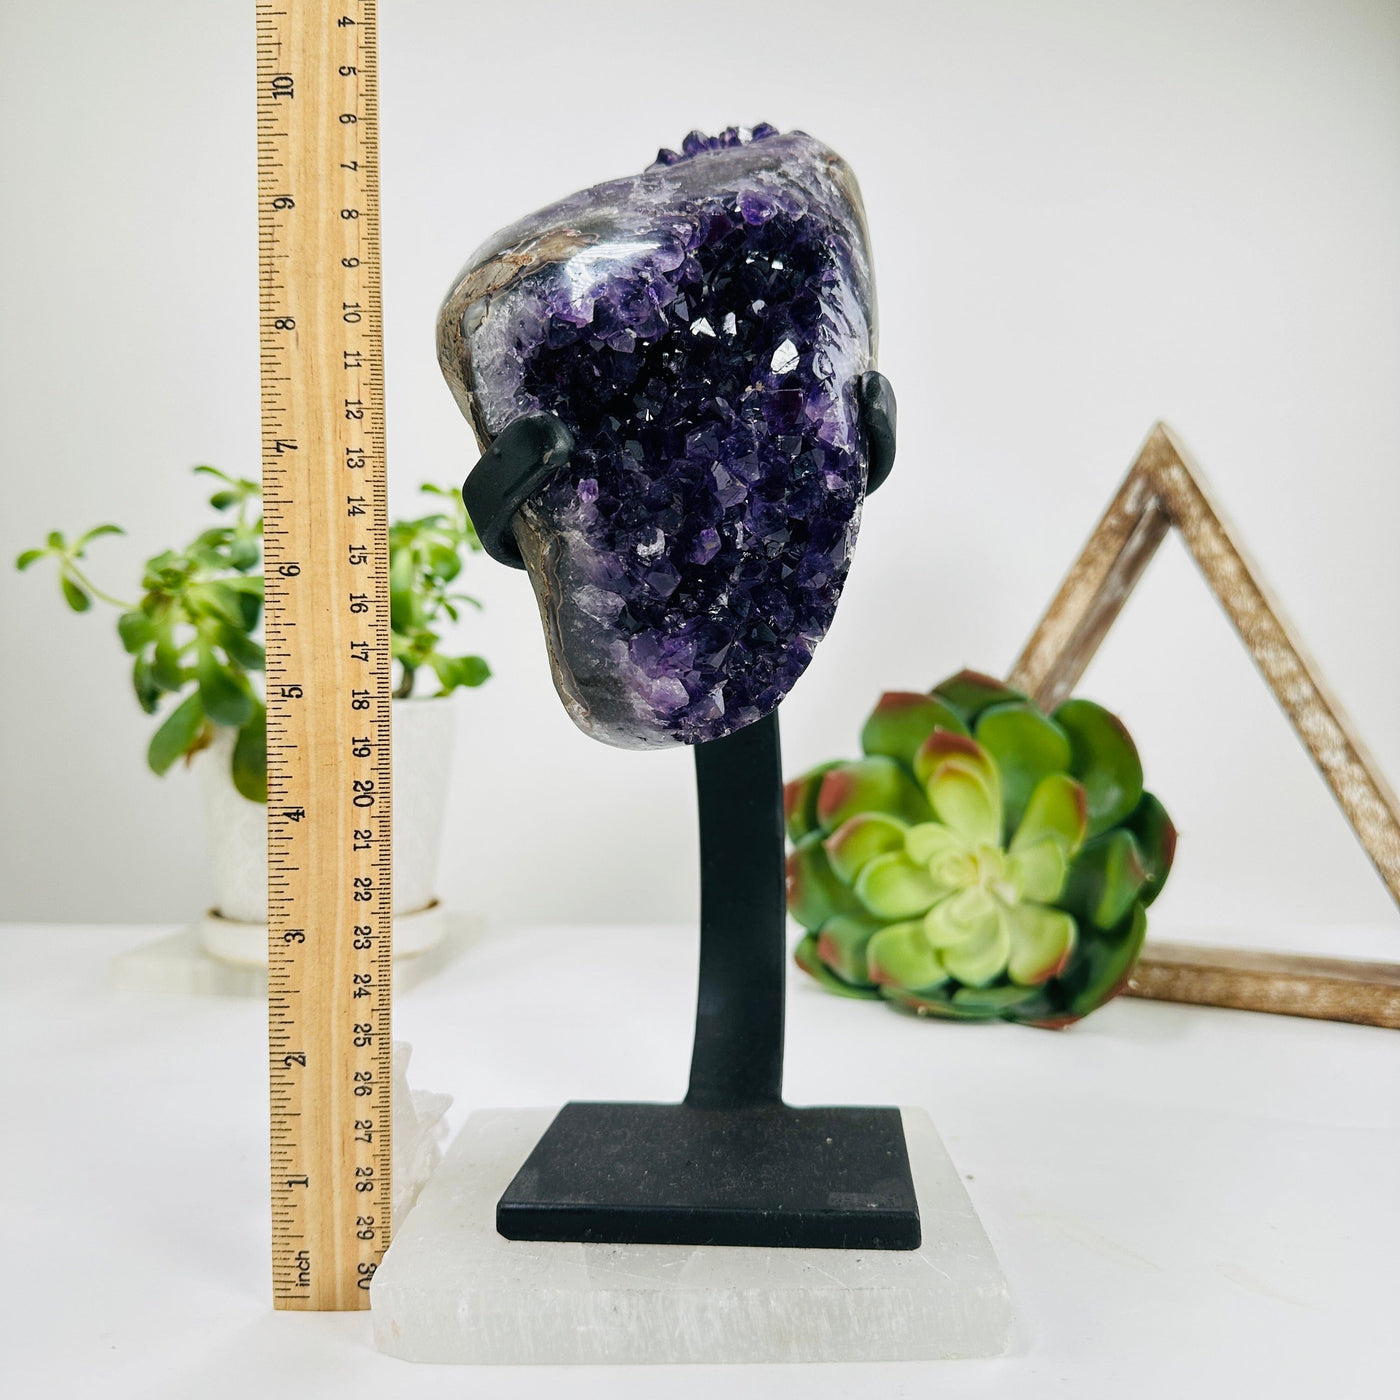 side view of semi polished geode on stand next to a ruler for size reference